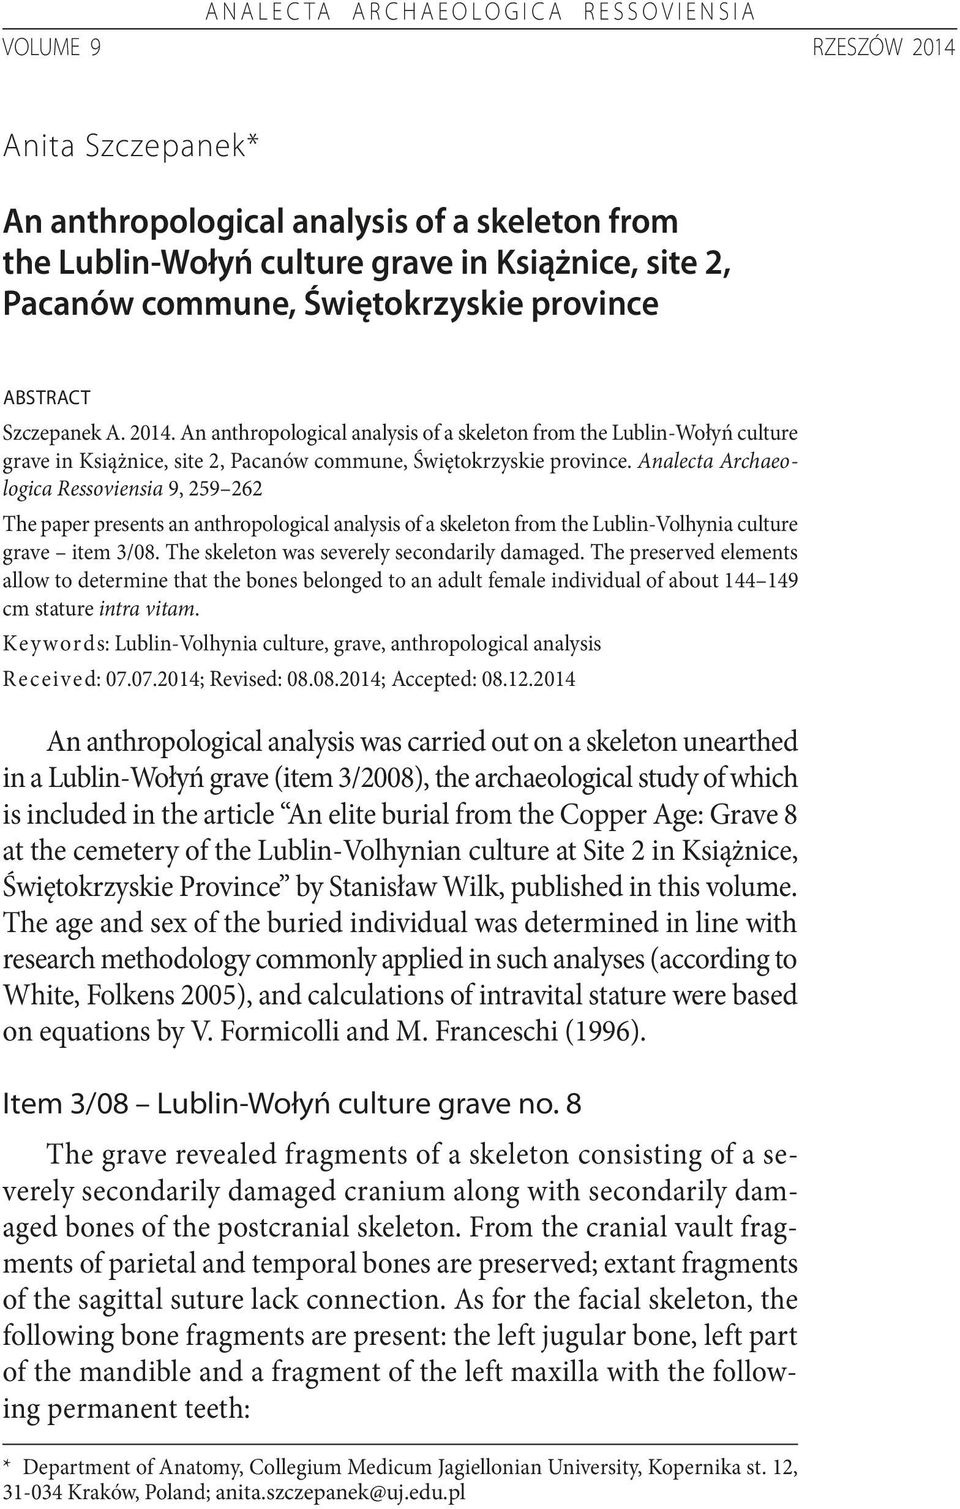 Analecta Archaeologica Ressoviensia 9, 259 262 The paper presents an anthropological analysis of a skeleton from the Lublin-Volhynia culture grave item 3/08.